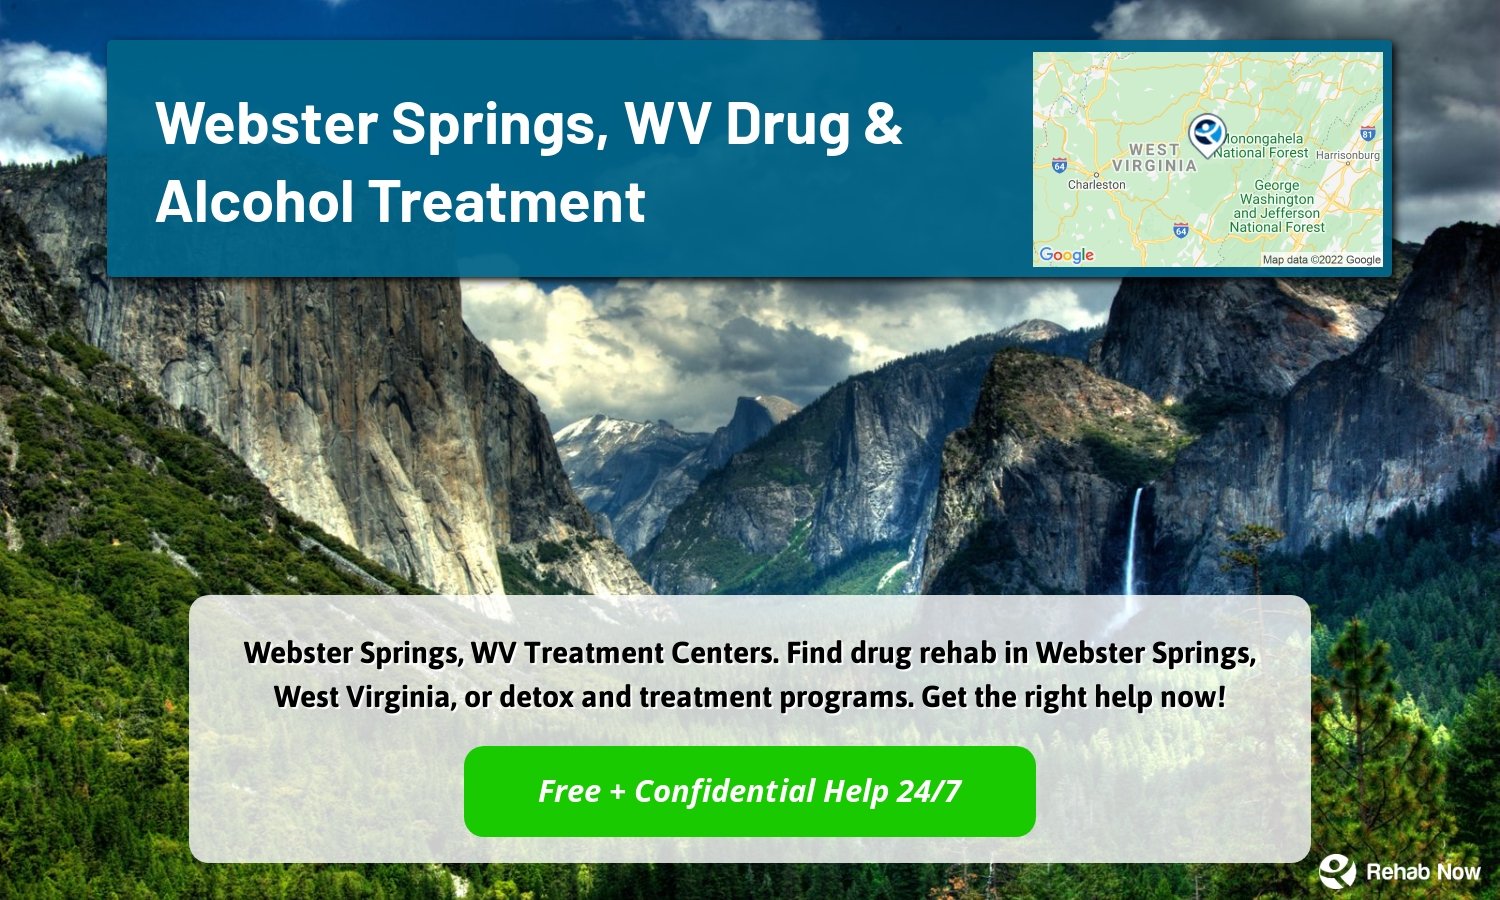 Webster Springs, WV Treatment Centers. Find drug rehab in Webster Springs, West Virginia, or detox and treatment programs. Get the right help now!